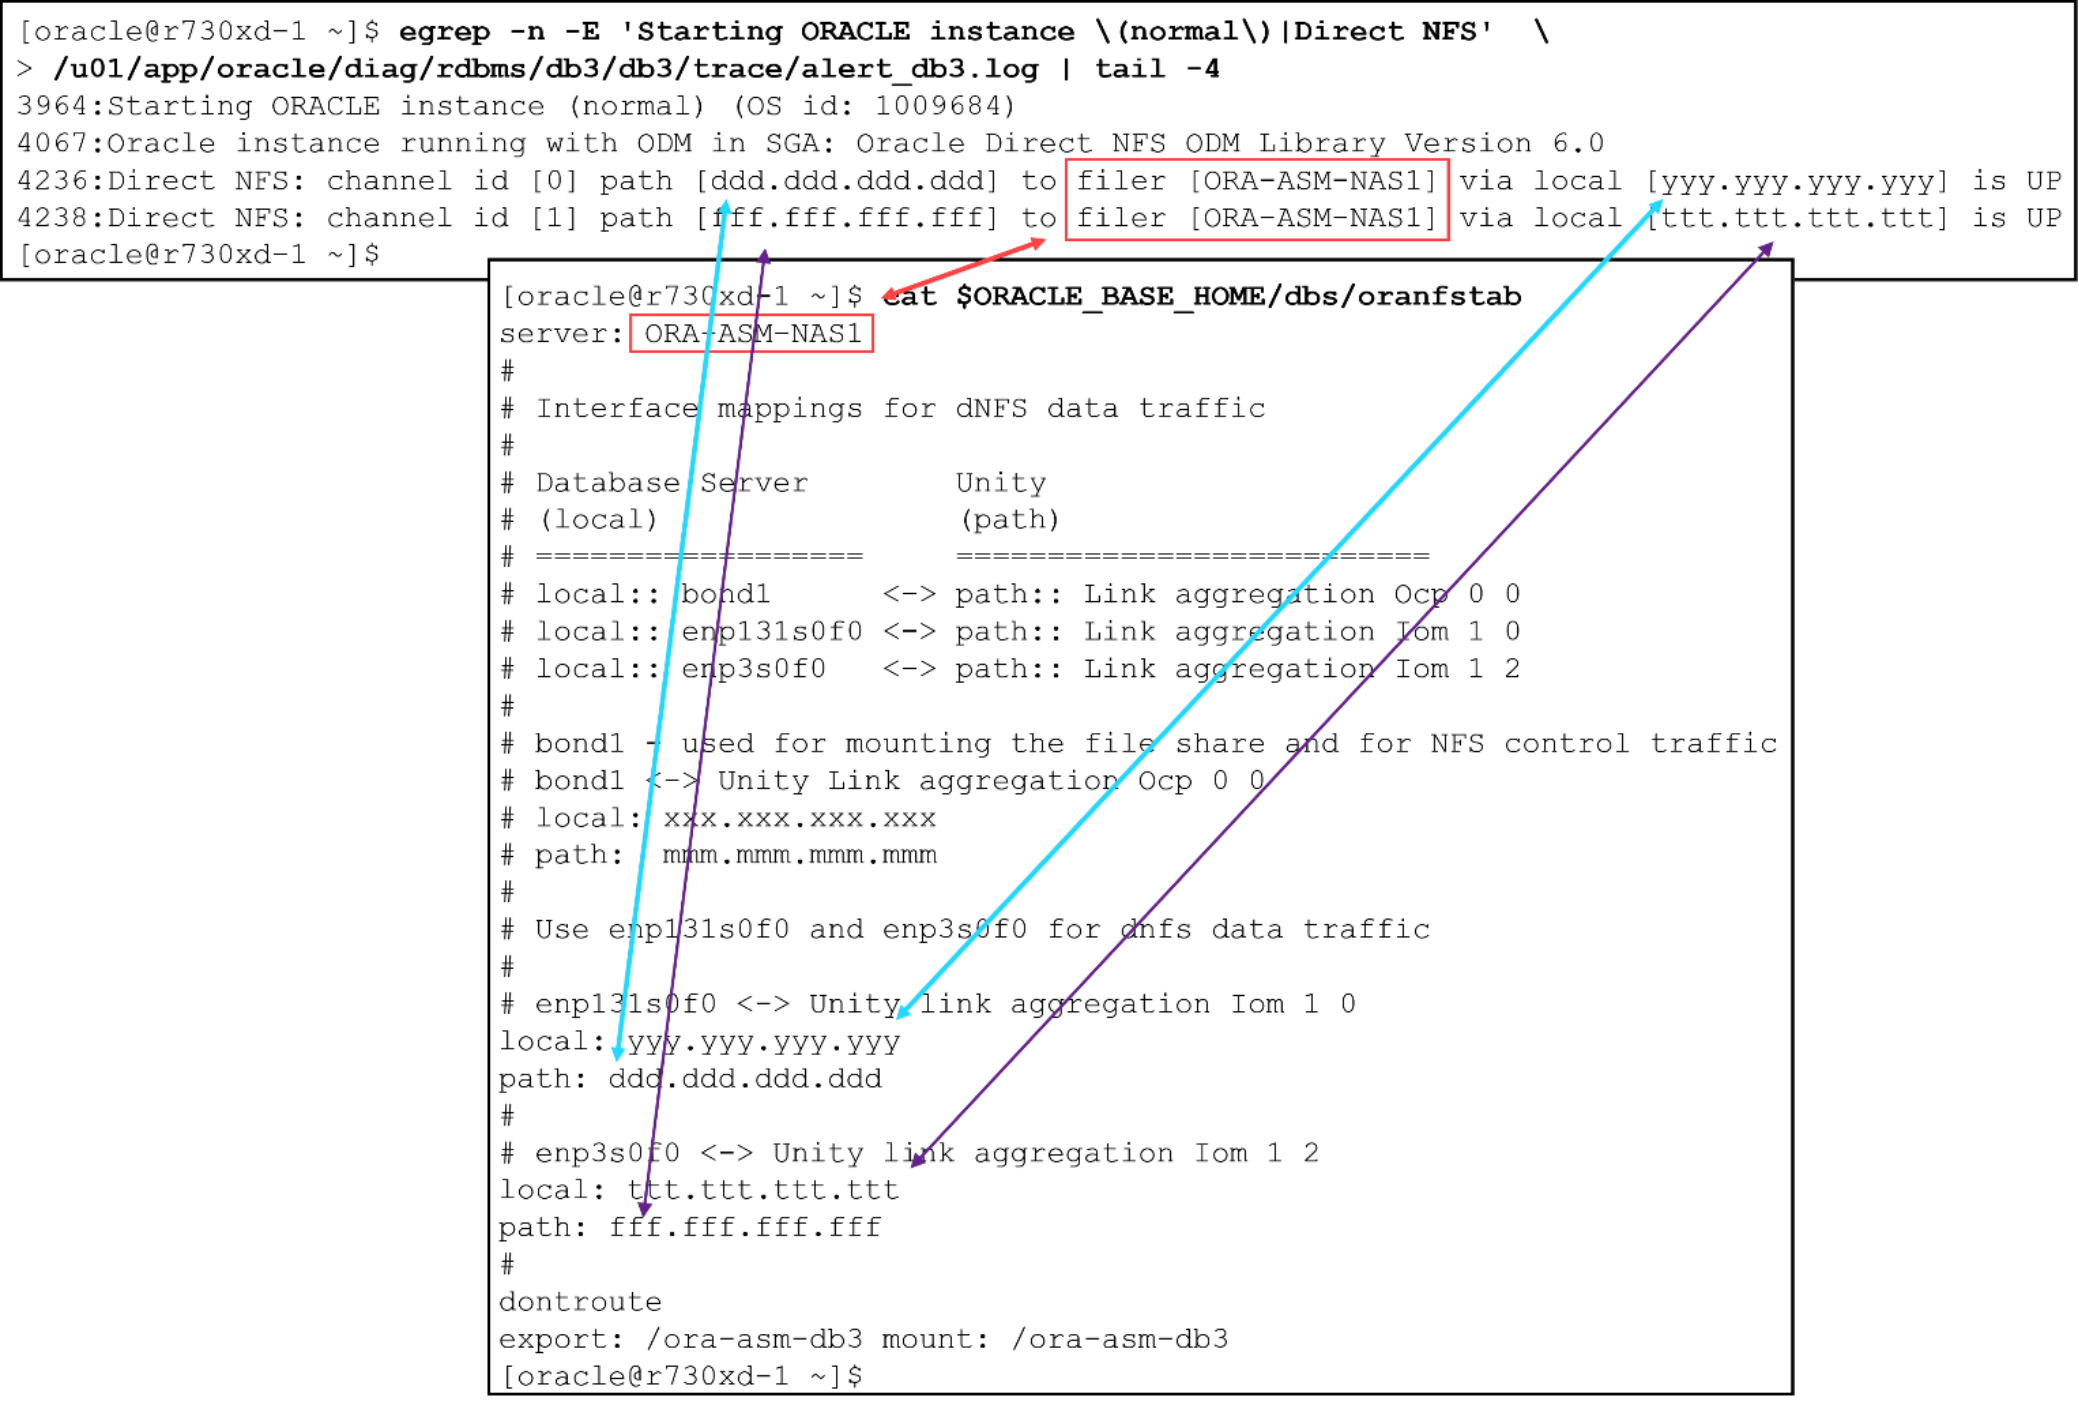 This diagram show the relationship between the dNFS paths defined in Oracle's oranfstab file and the dNFS channels identified in Oracle alert.log file.